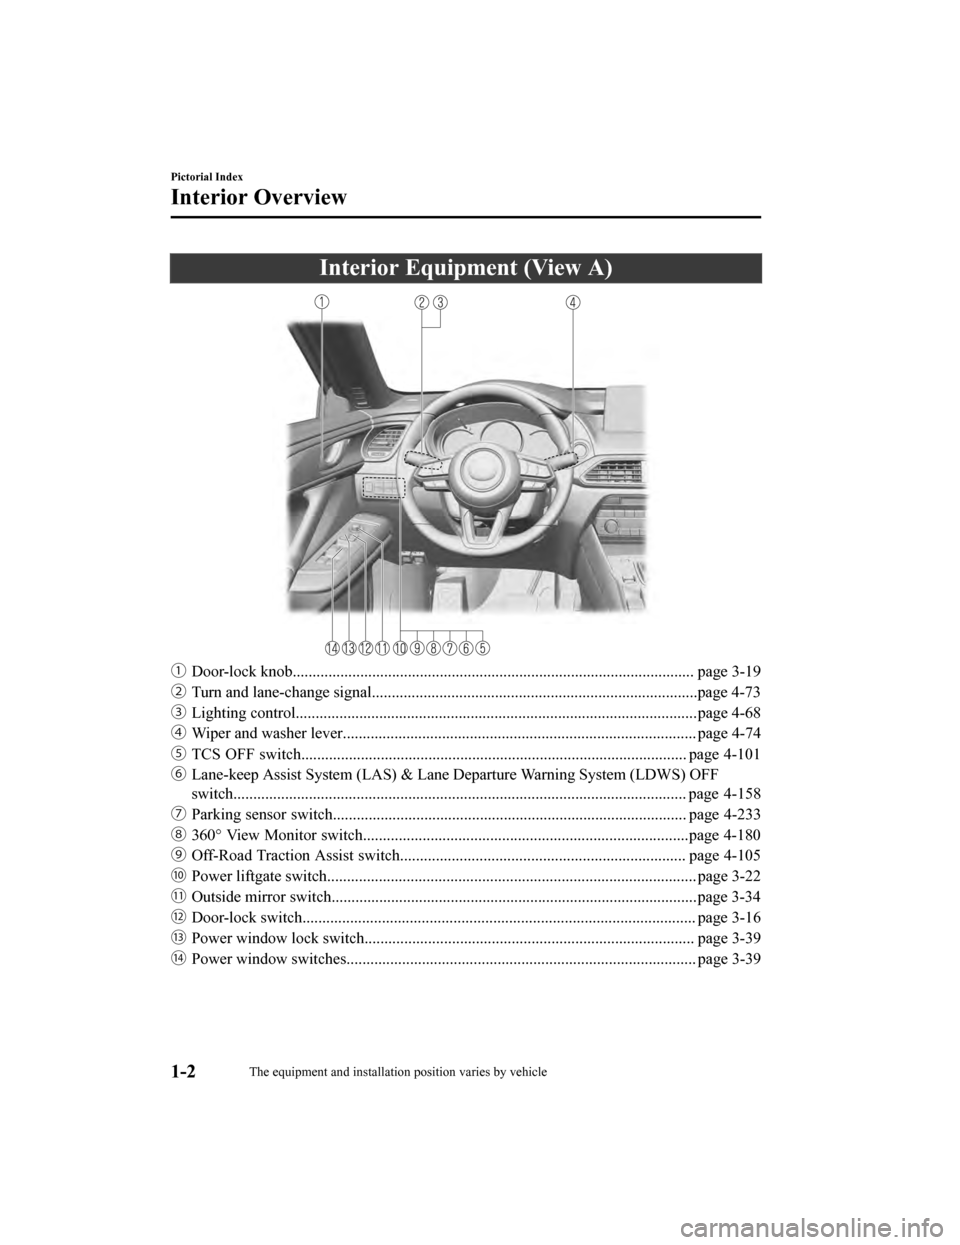 MAZDA MODEL CX-9 2020  Owners Manual (in English) Interior Equipment (View A)
ƒDoor-lock knob..................................................................................................... page 3-19
„ Turn and lane-change signal...........